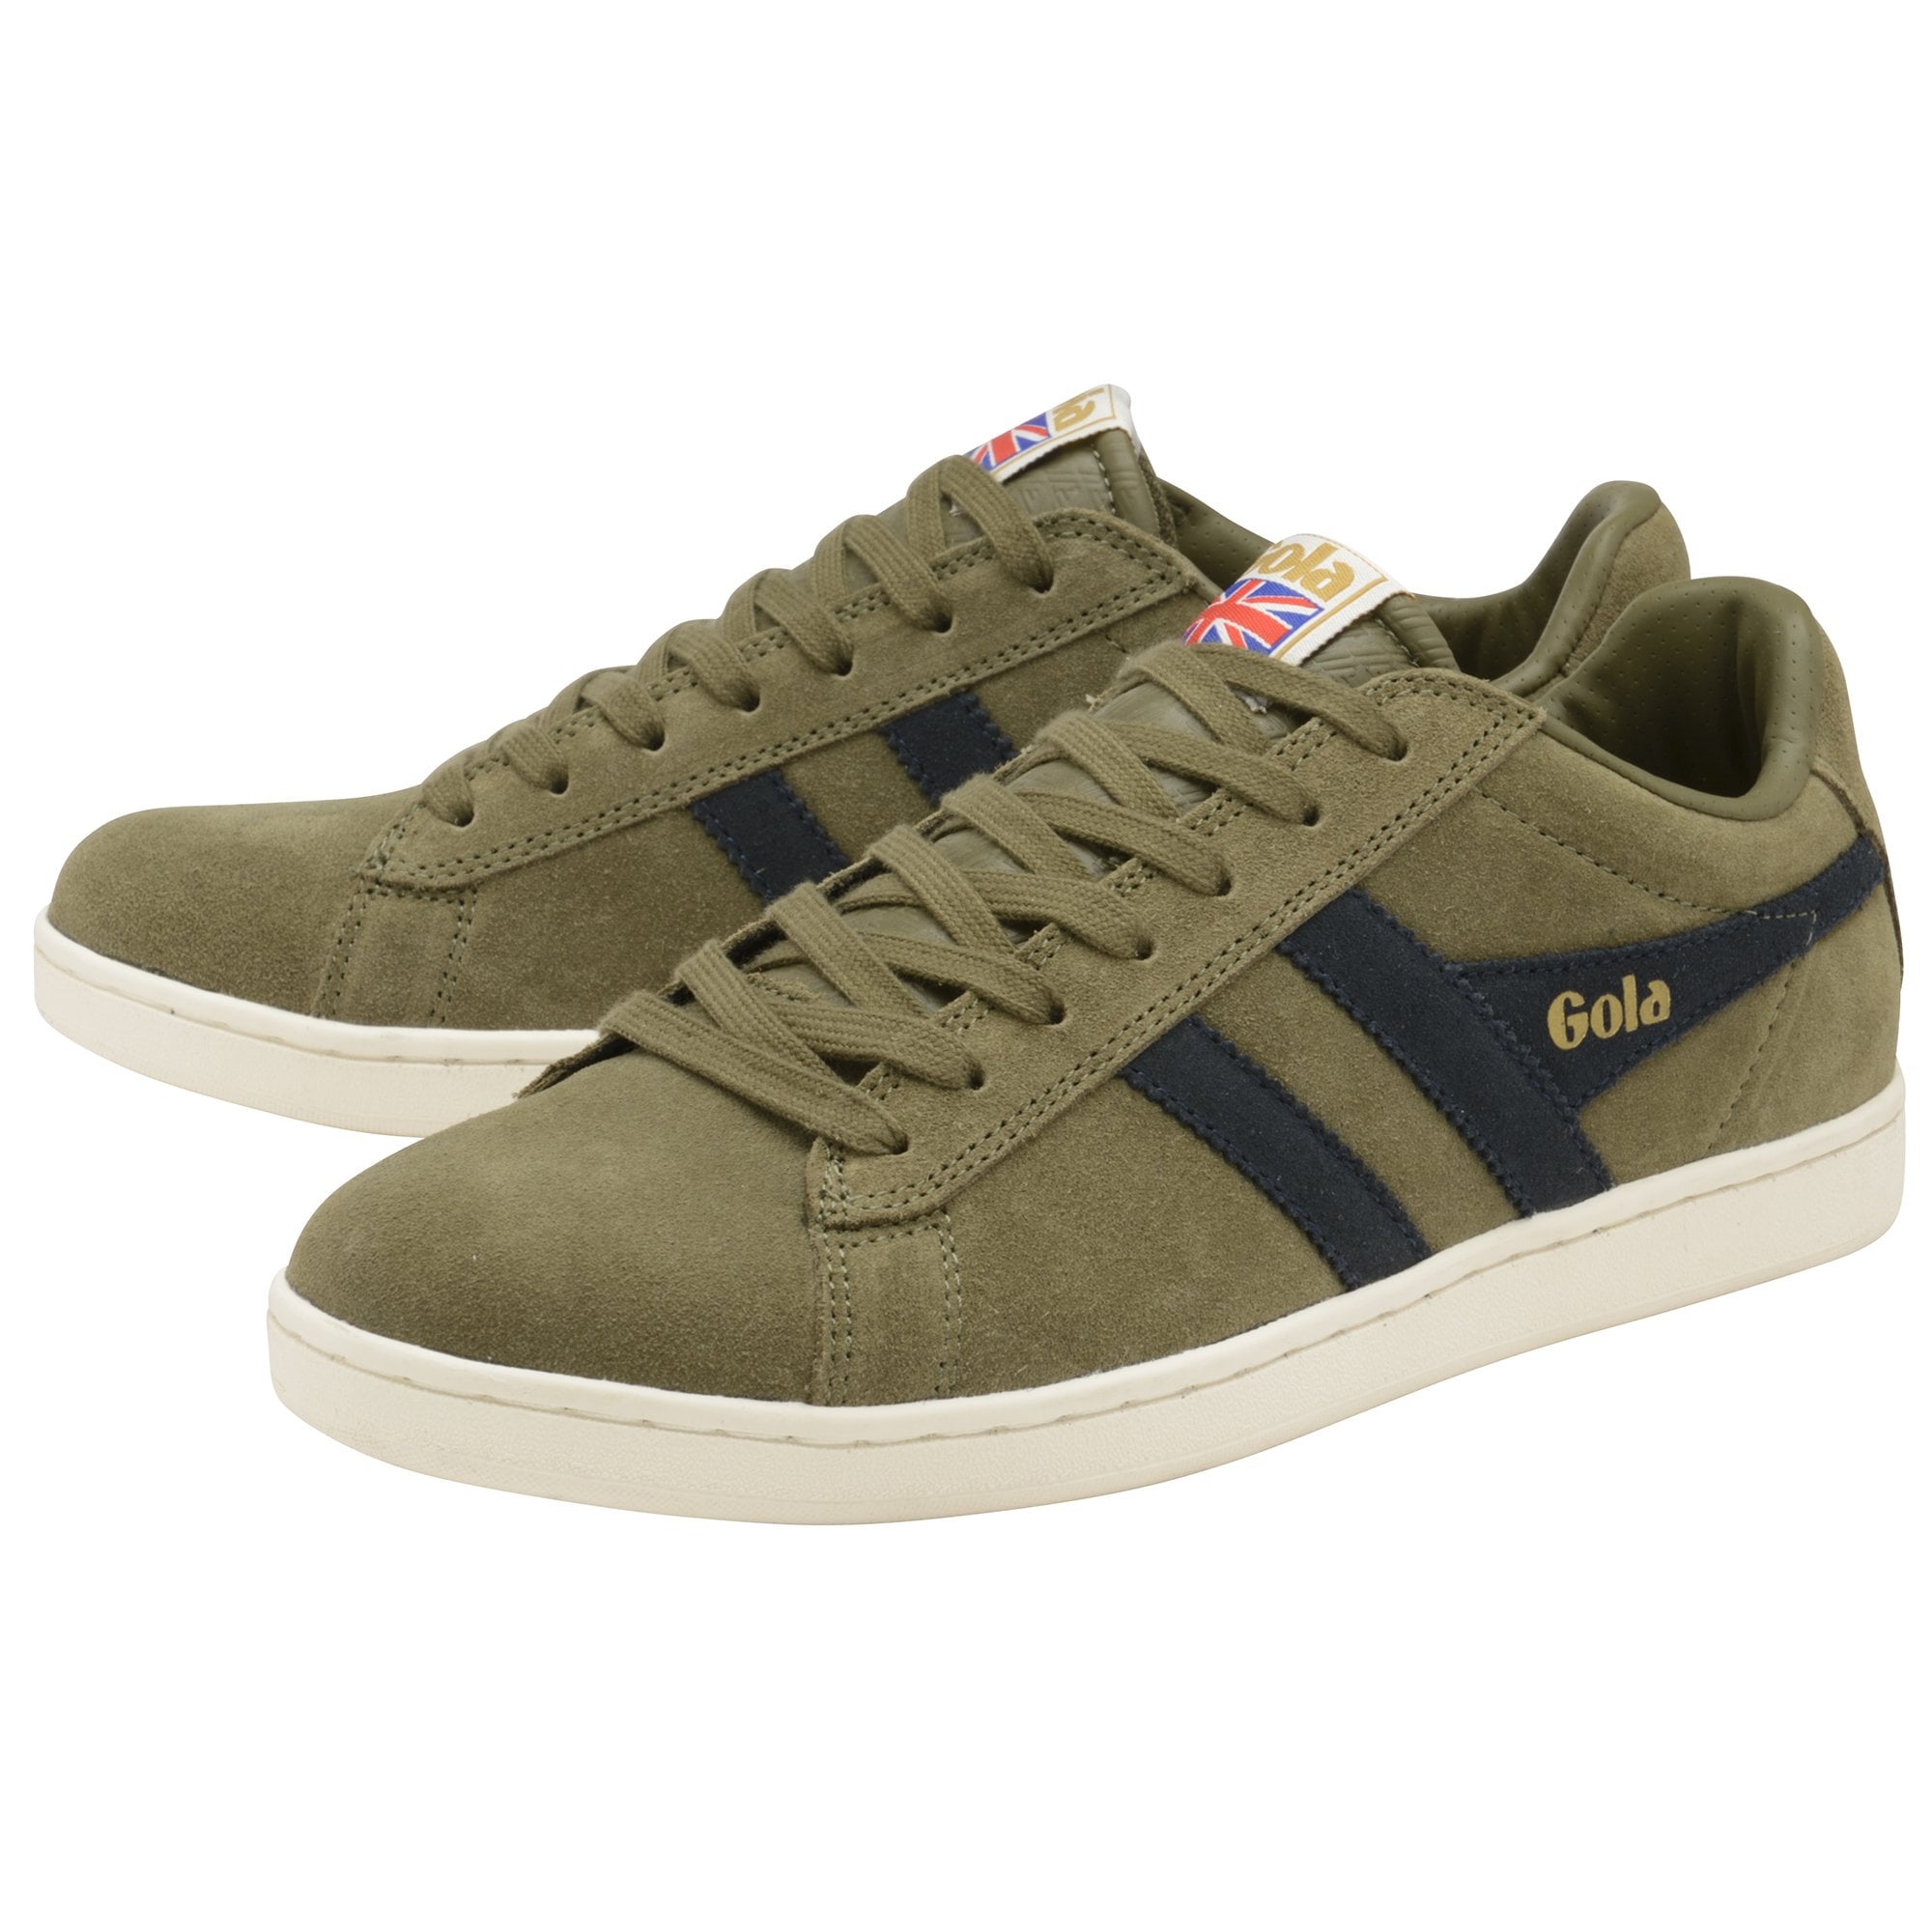 Gola Equipe Mens Khaki Suede Lace Up Trainers